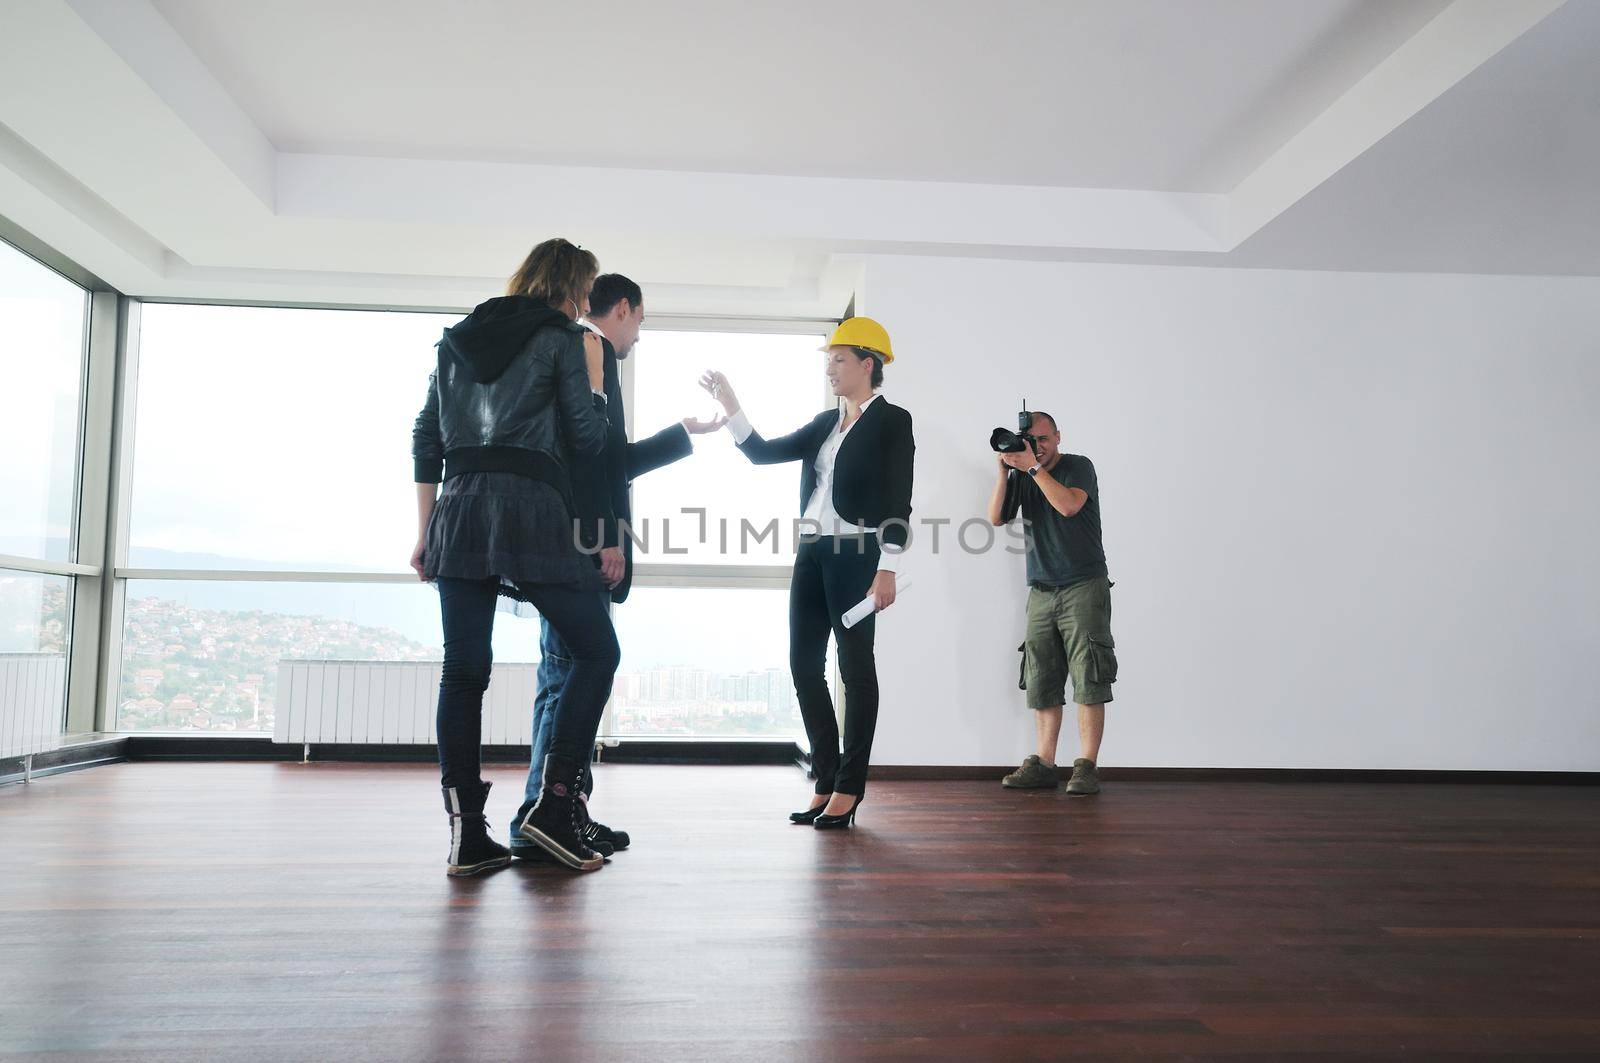 profesional stock photographer on stock photo session with young models 